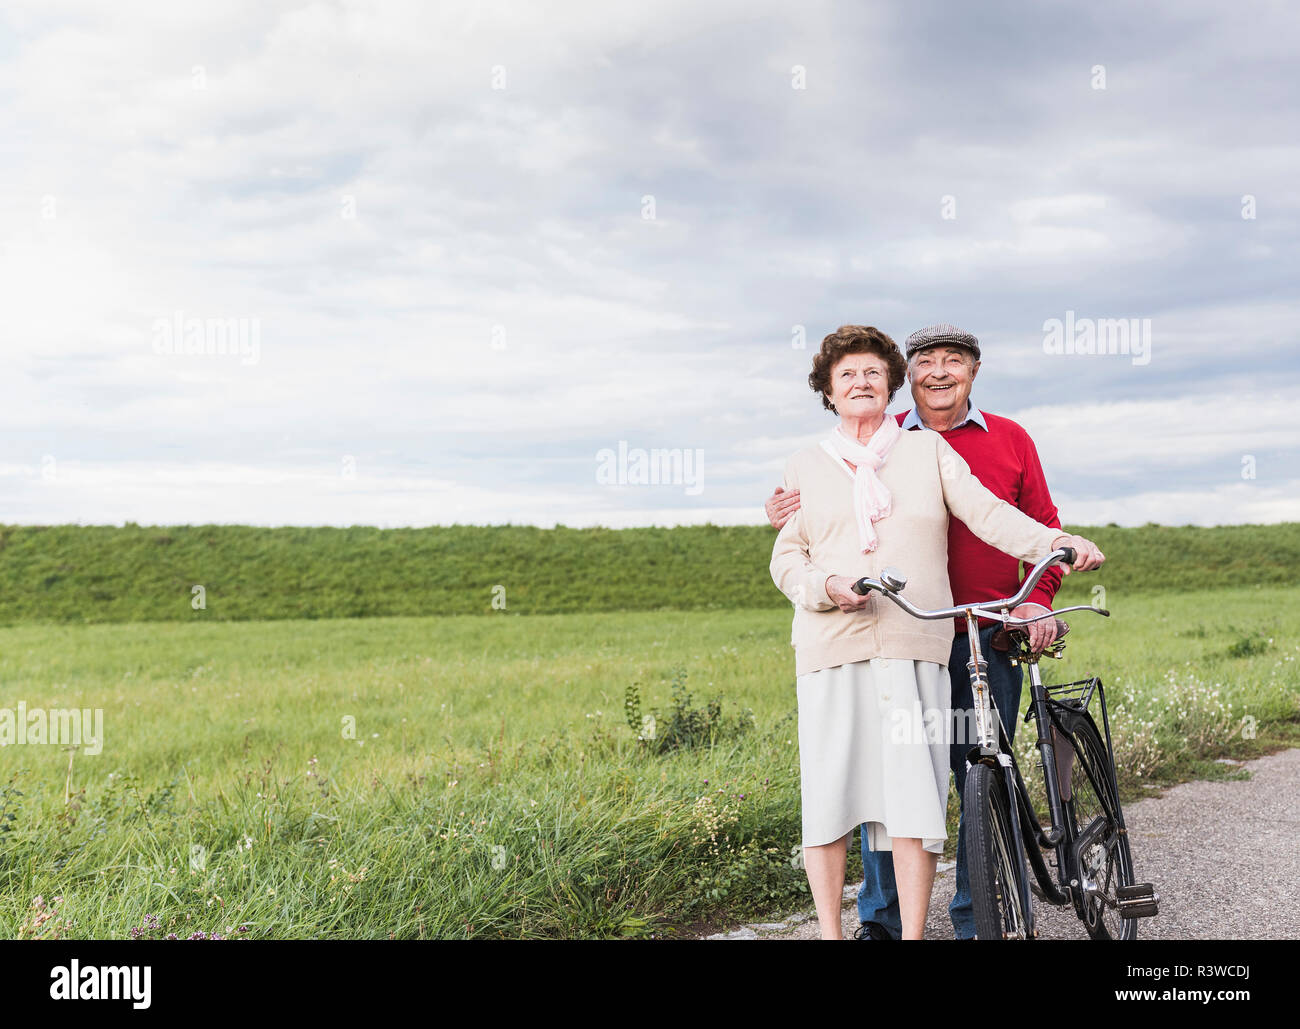 Senior couple with bicycles in rural landscape Banque D'Images